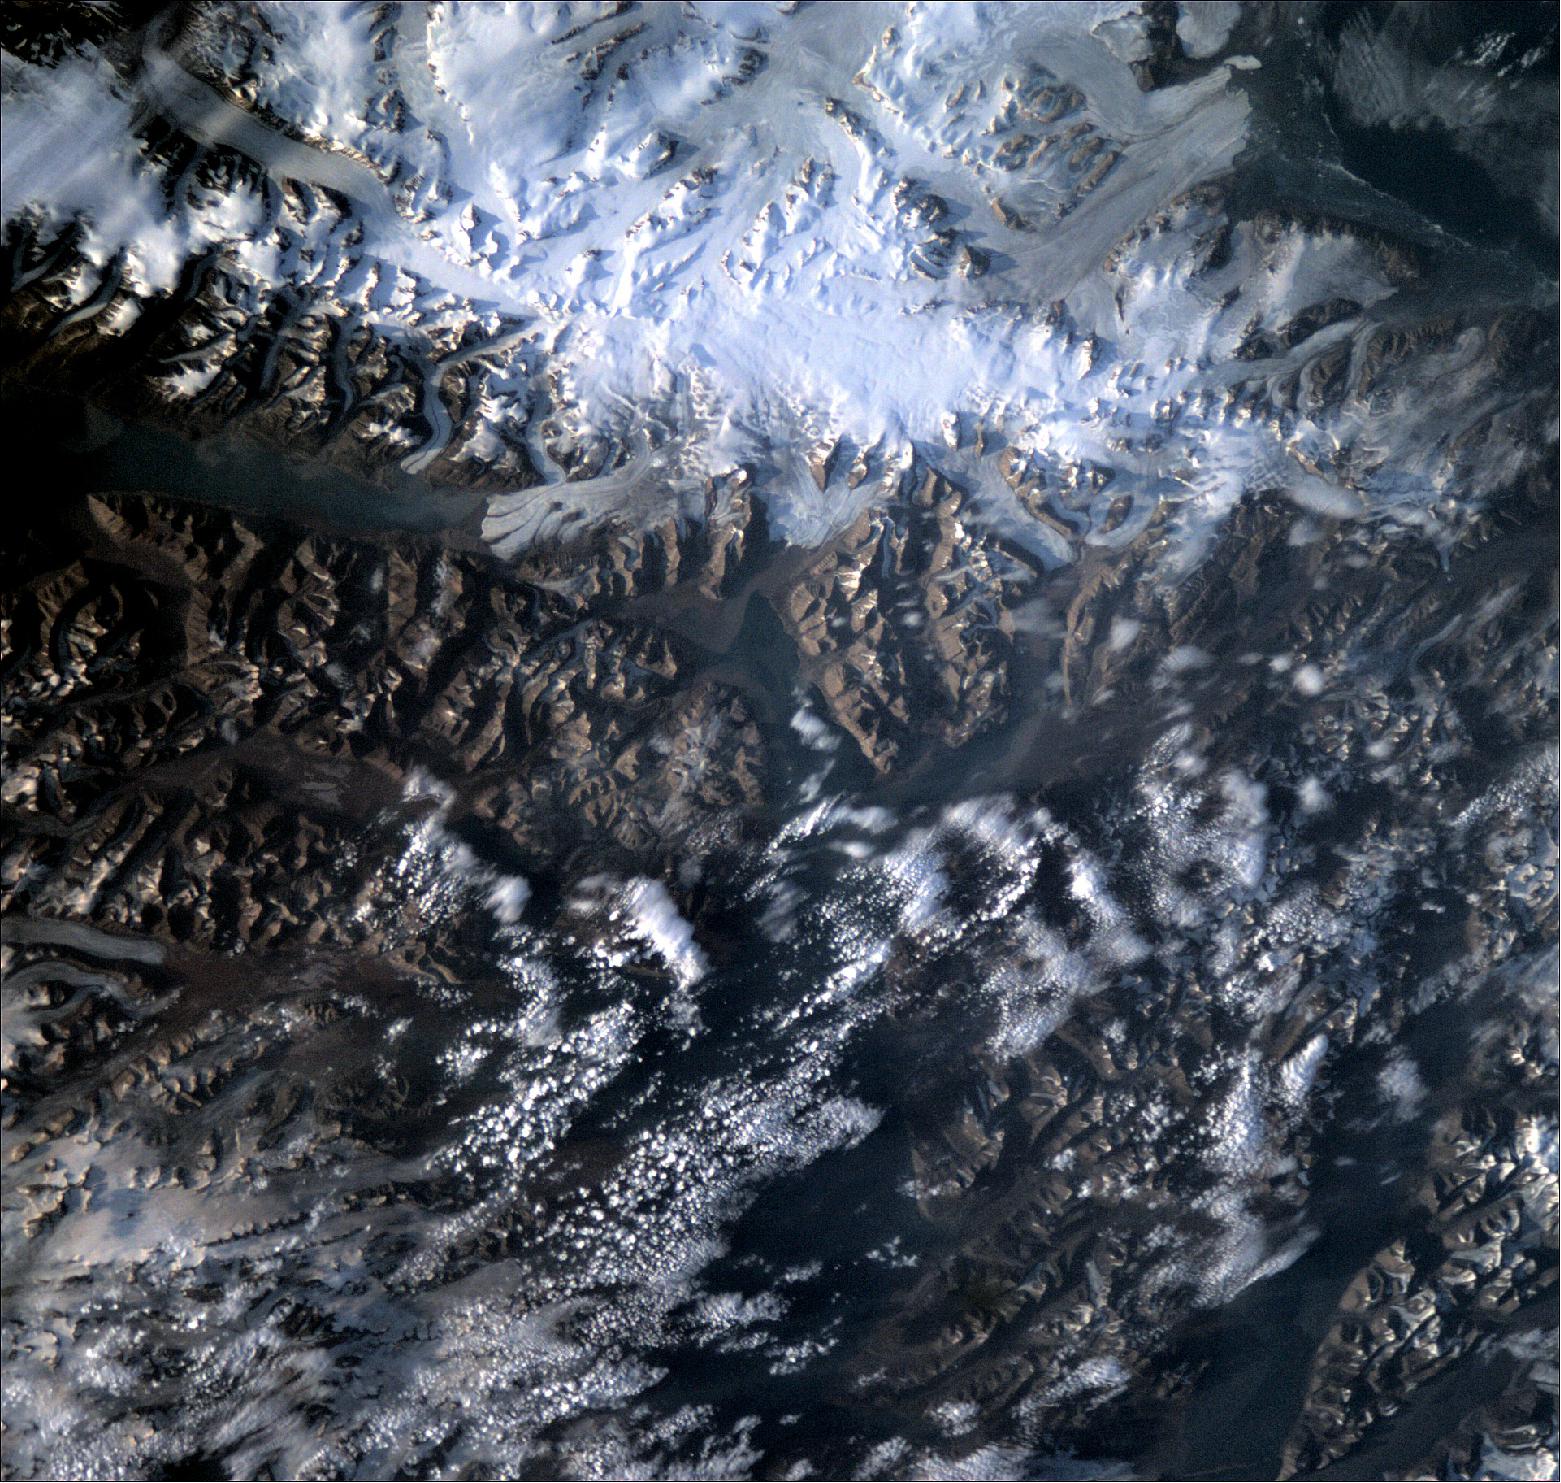 Figure 14: Space laboratory sees snowy Svalbard. This rugged, remote terrain is one of the world's northernmost inhabited regions. A Norwegian archipelago in the Arctic Ocean, part way between Norway and the North Pole, Svalbard is made up of glaciers and frozen tundra. This photo was captured by OPS-SAT, ESA’s space laboratory, as it underwent commissioning of its high-definition camera on 26 July 2020. At an altitude of more than 500 km, the small spacecraft managed to capture the beautiful detail of this unique region, including the long, horizontal body of water at the top-left of the image, the notorious 32 km long Austfjorden fjord of Svalbard (image credit: ESA)